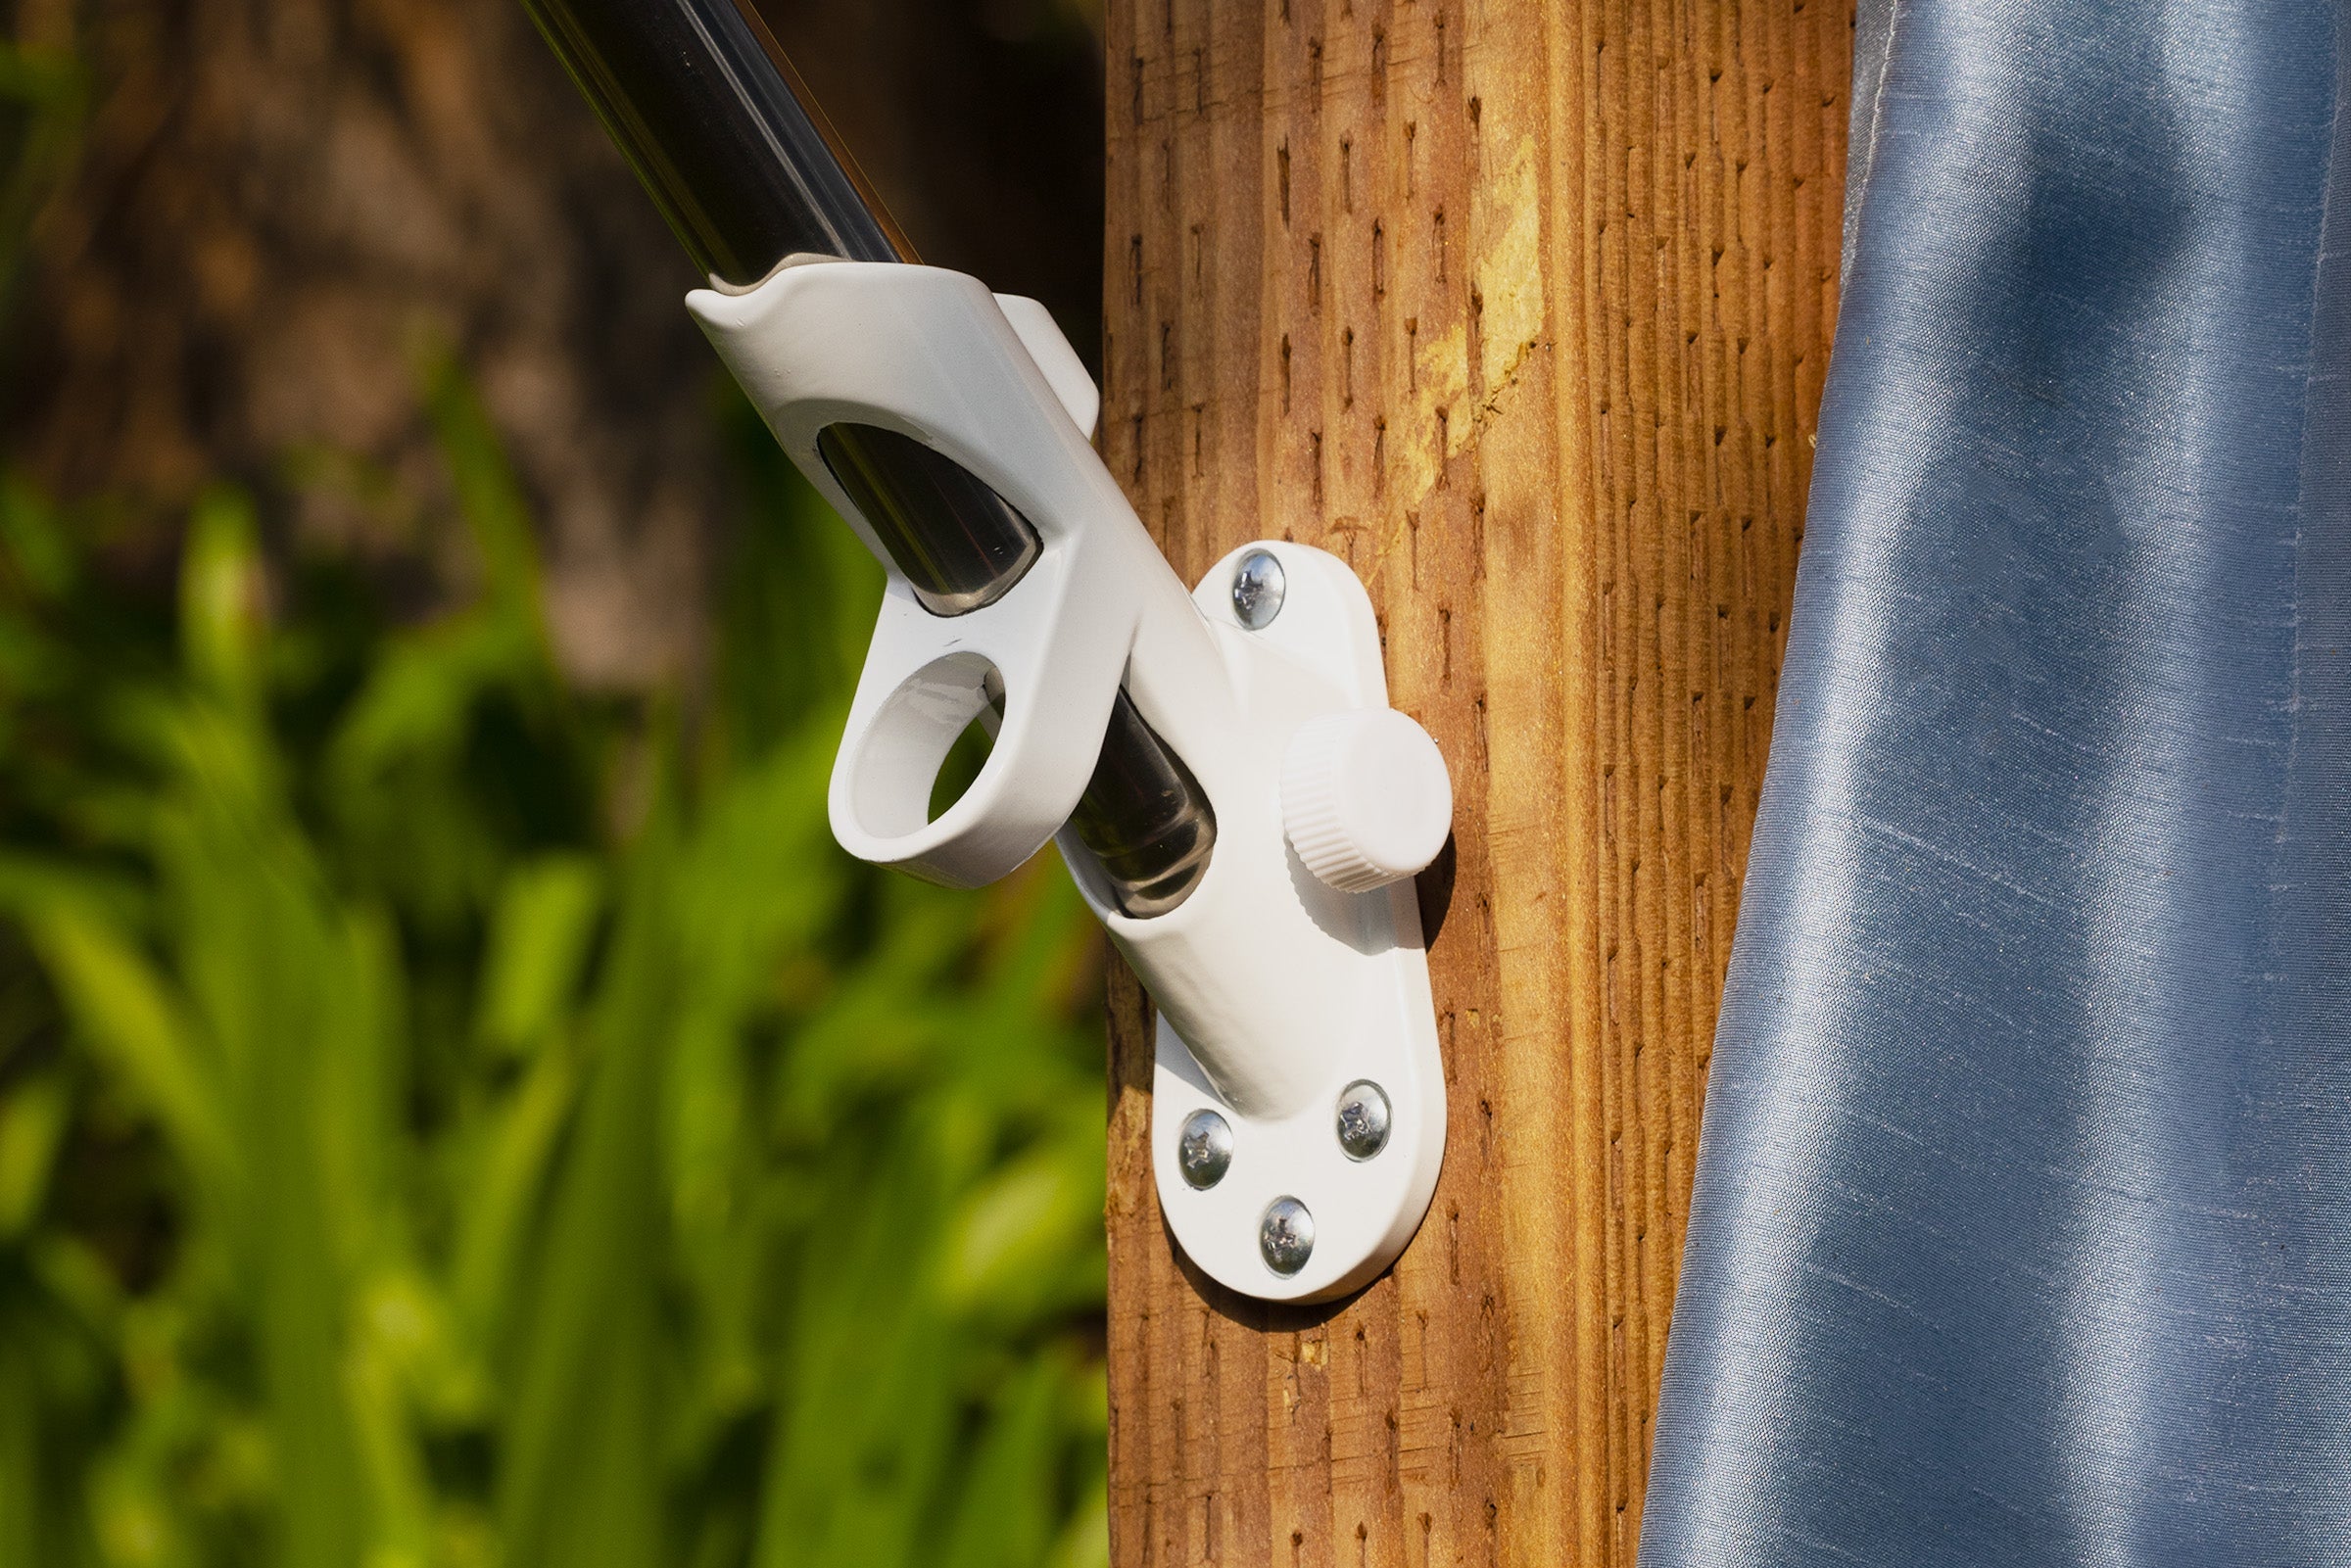 A pre-assembled white flag pole holder is mounted on a wooden post with screws, holding a long-lasting metal pole against a background of greenery and a blue fabric, perfect for displaying your American Flag.